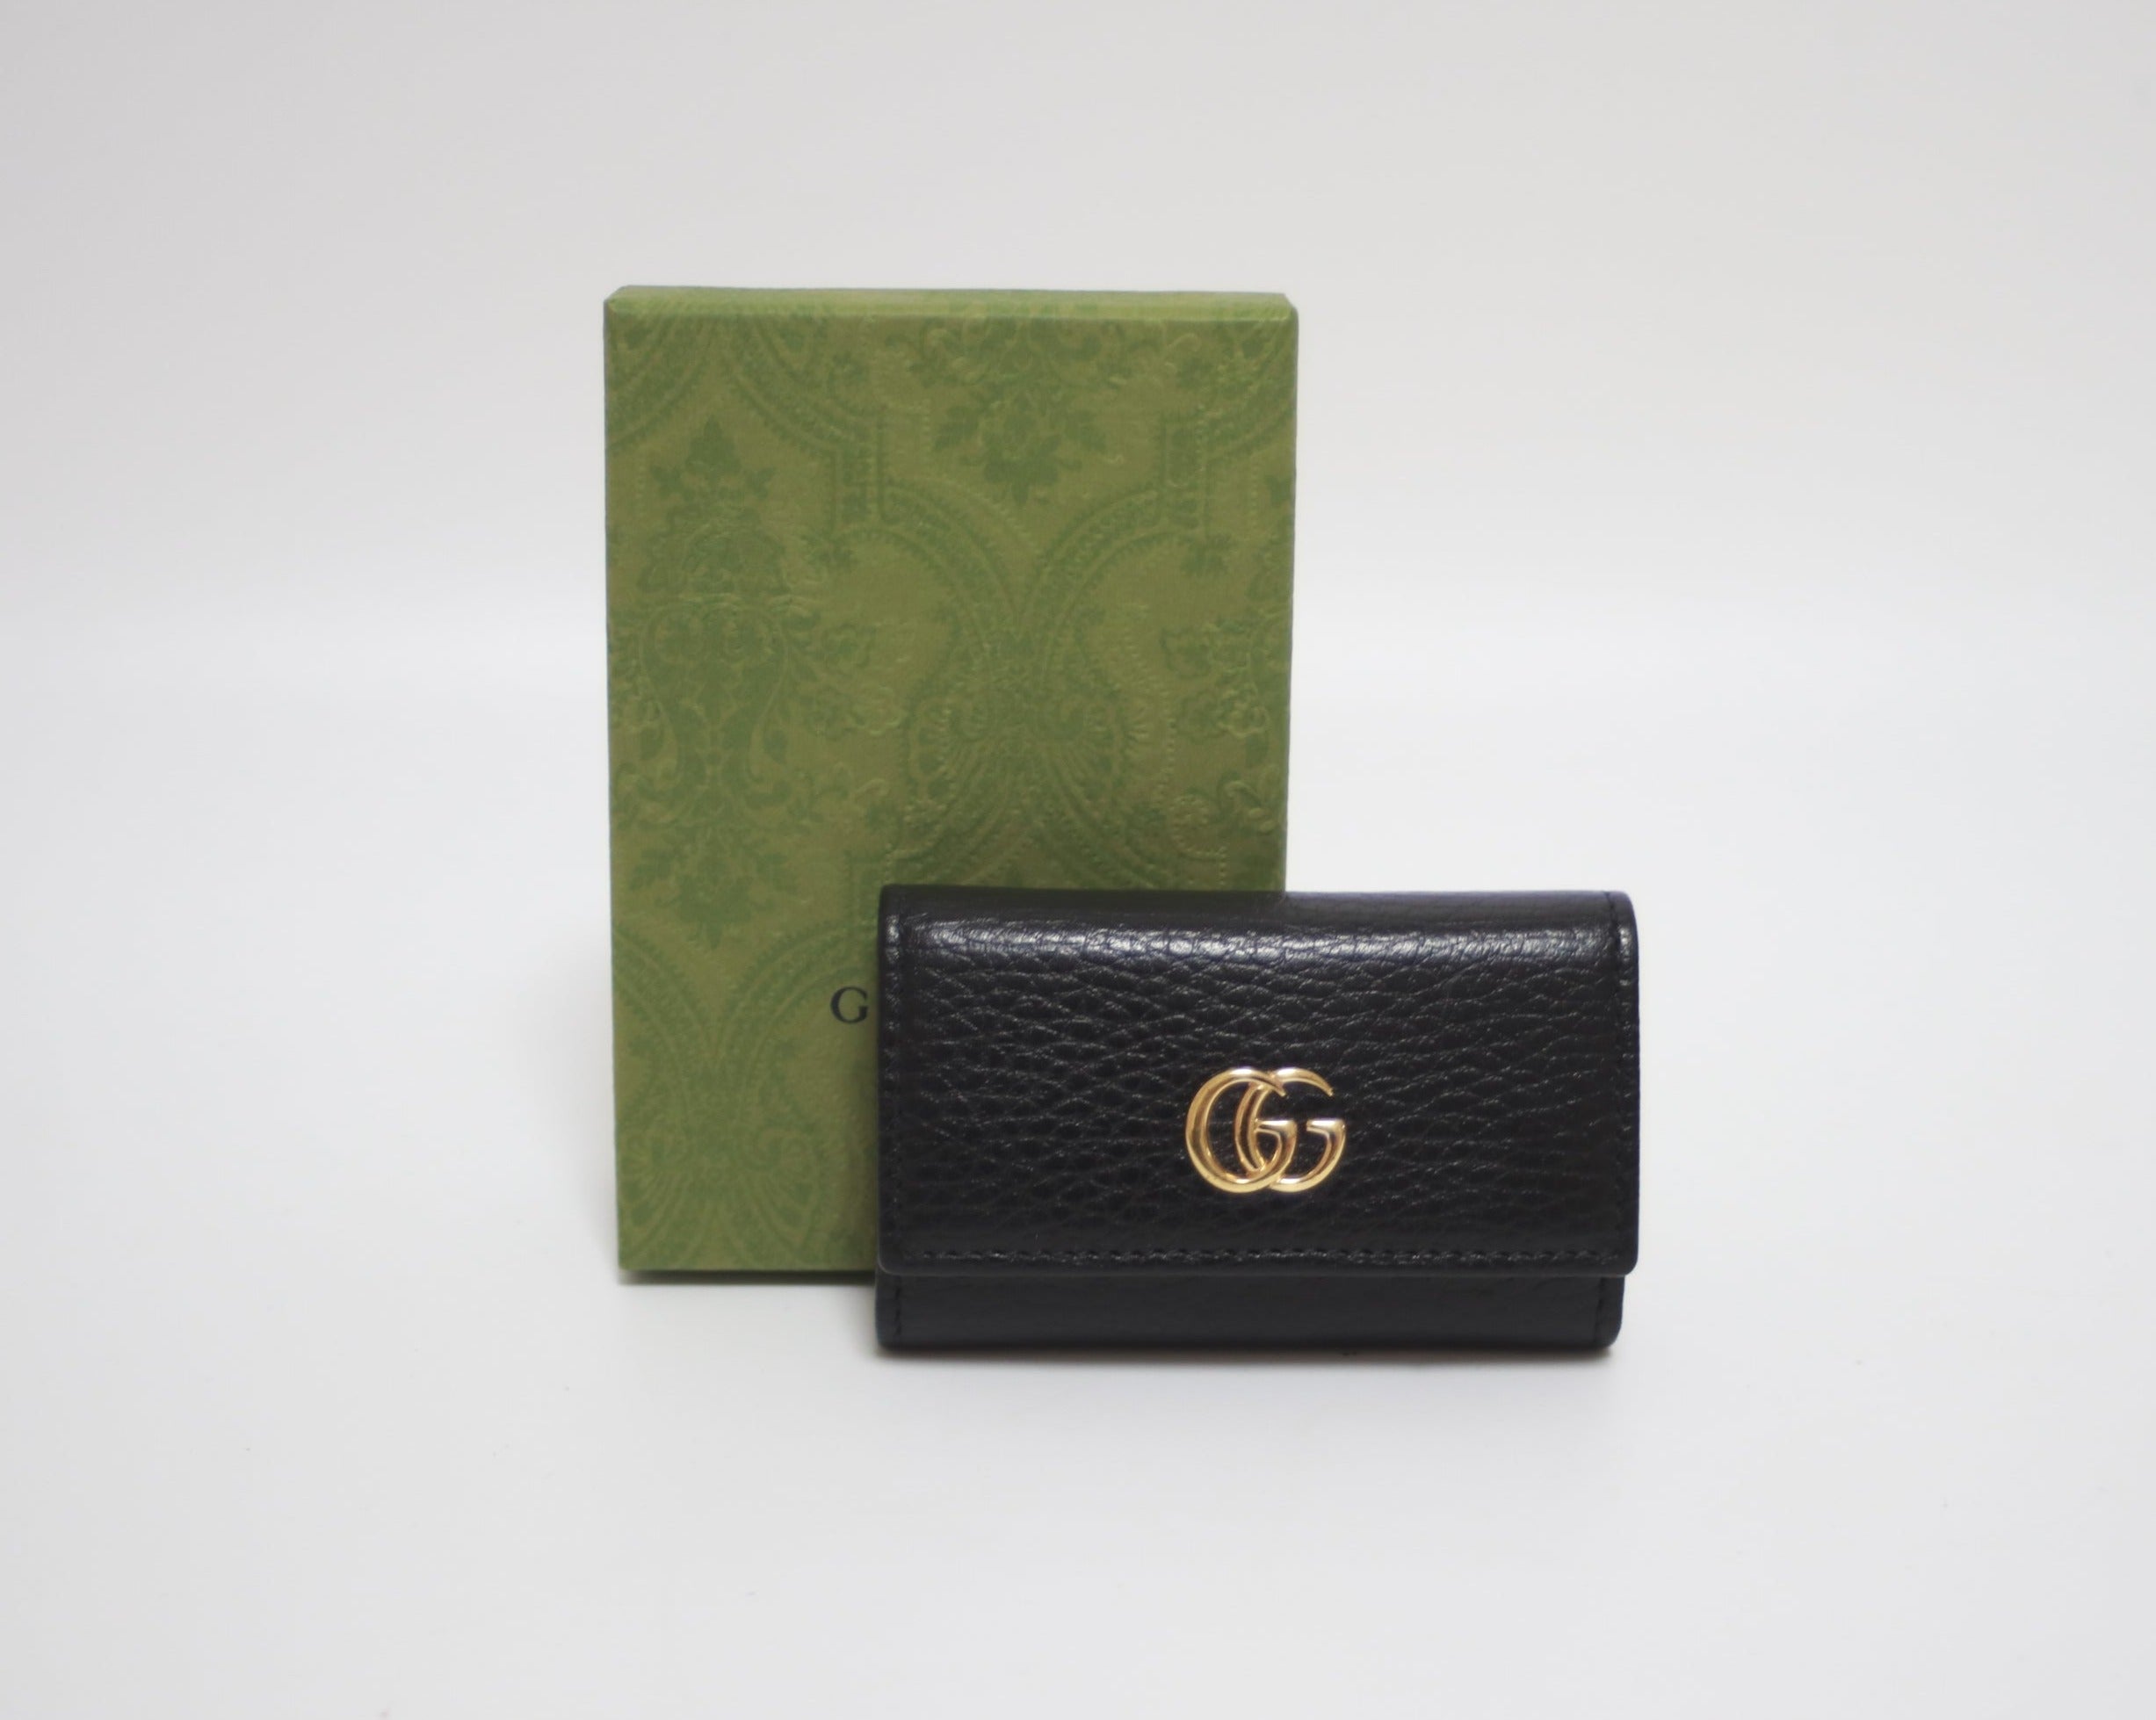 Gucci Marmont Key Case Used (8026)